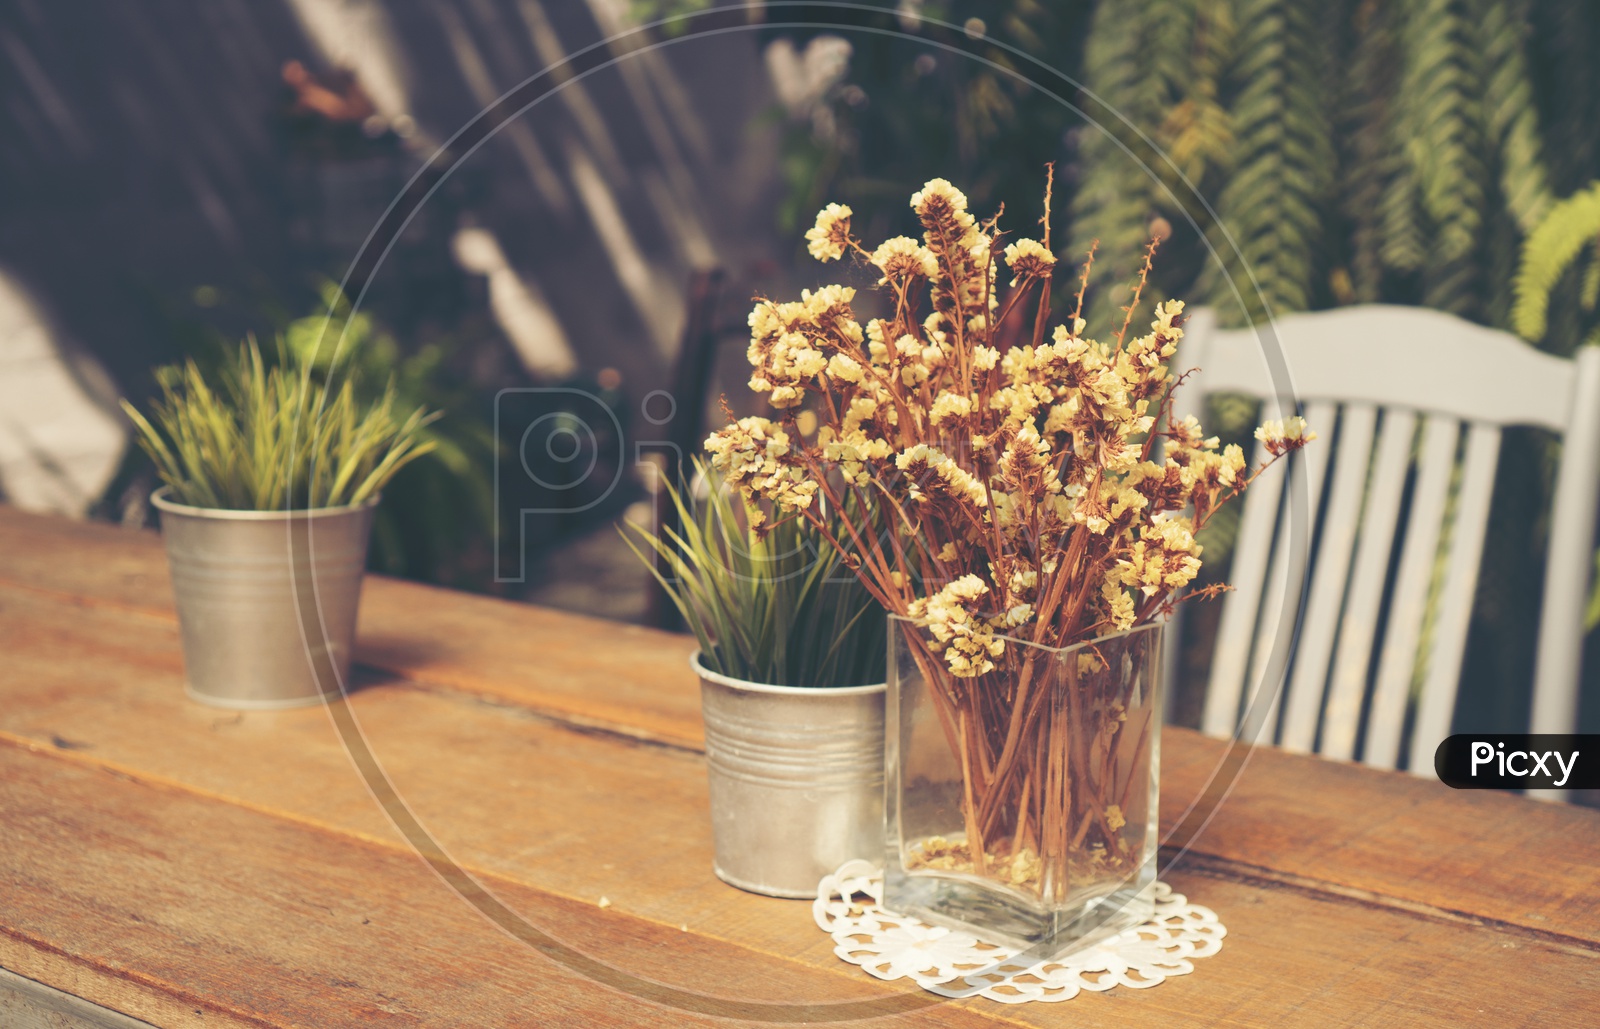 dry yellow flowers in a Vase  on table in a Cafe Or restaurant